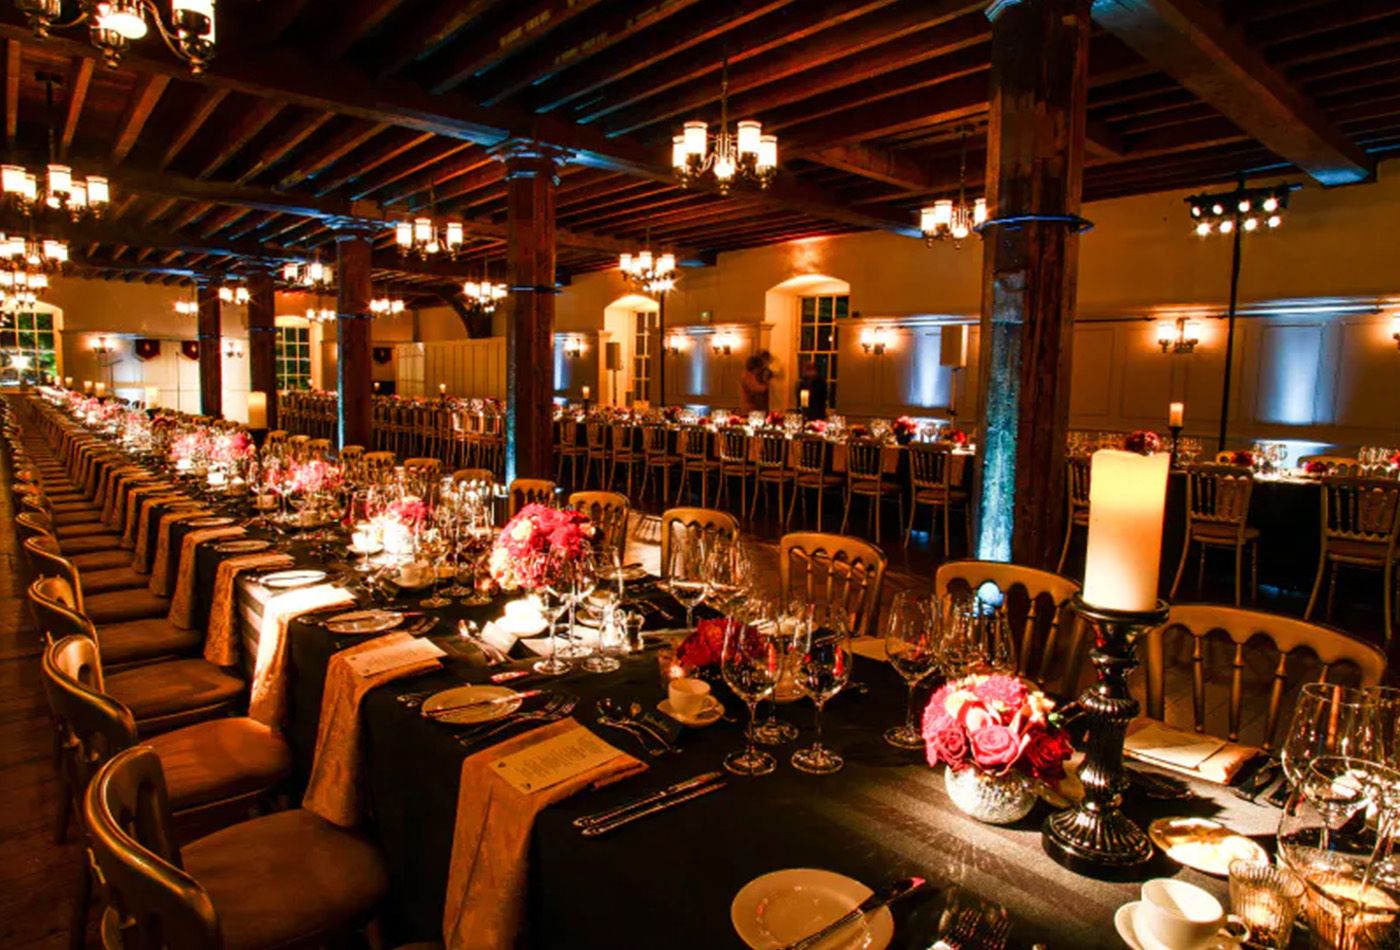 Dark, long table wedding set up with golden chairs and wooden beamed ceiling